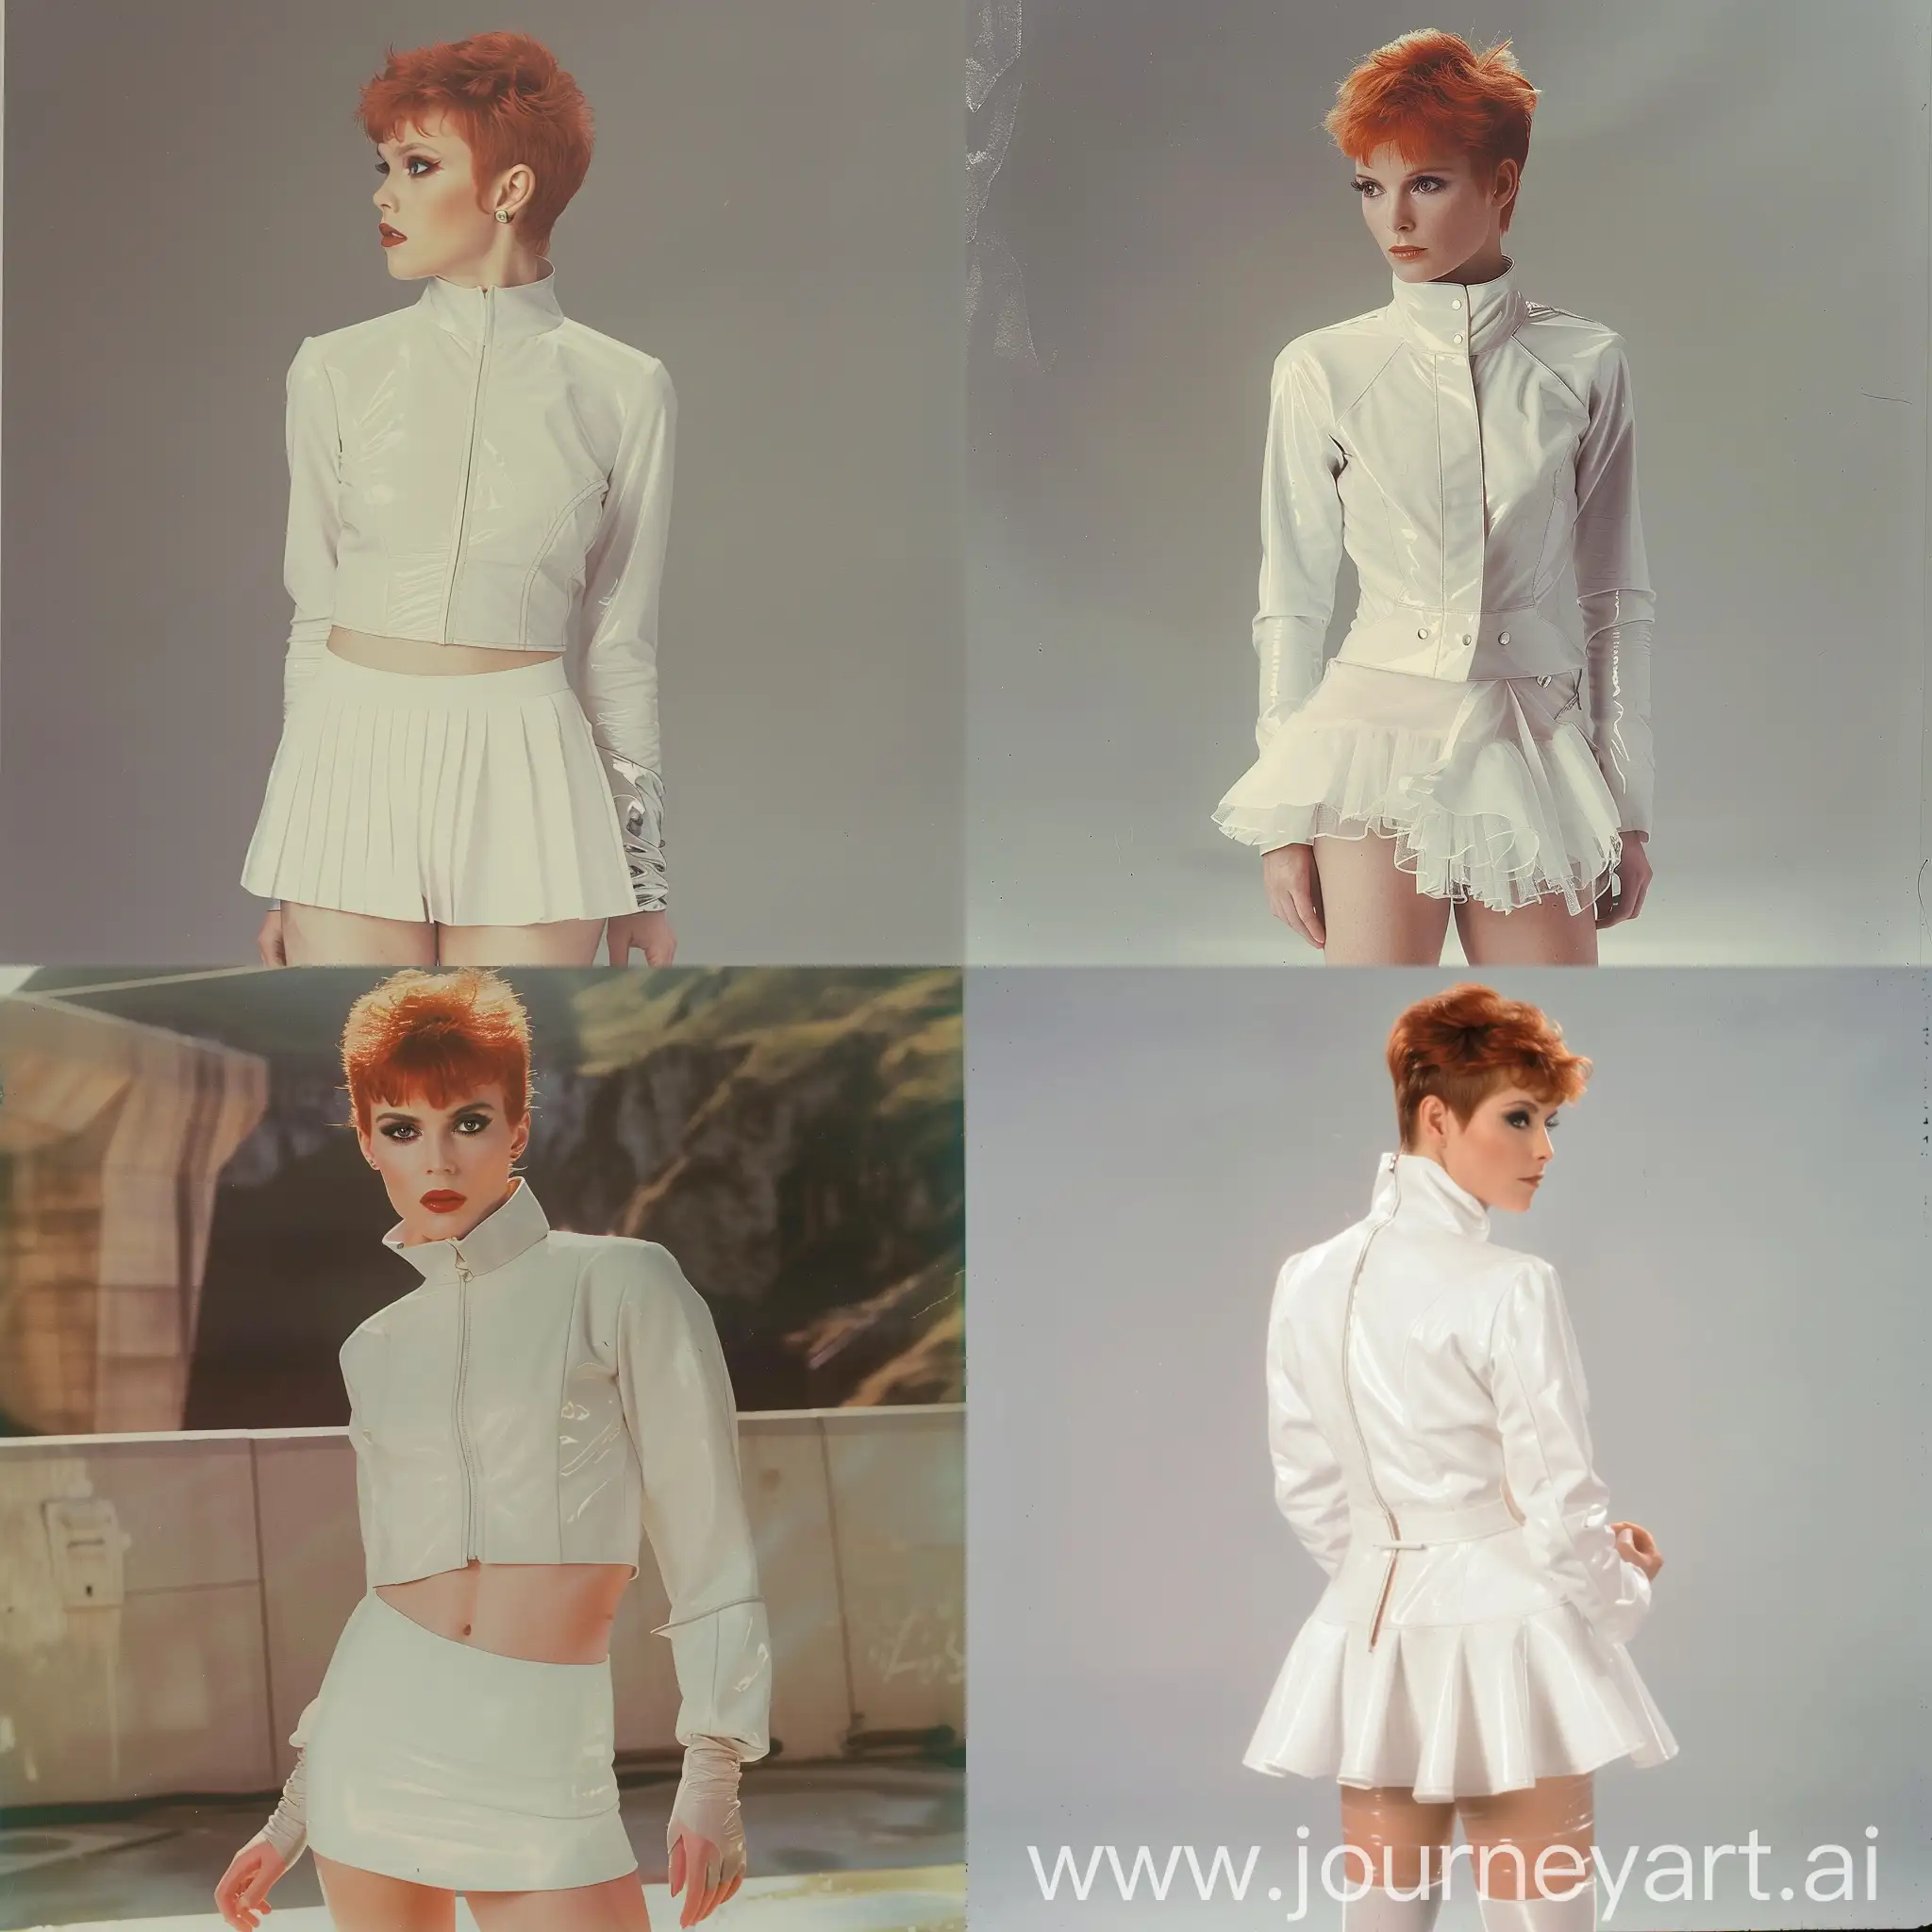 1980s-Style-Woman-in-White-Latex-Jacket-and-Skirt